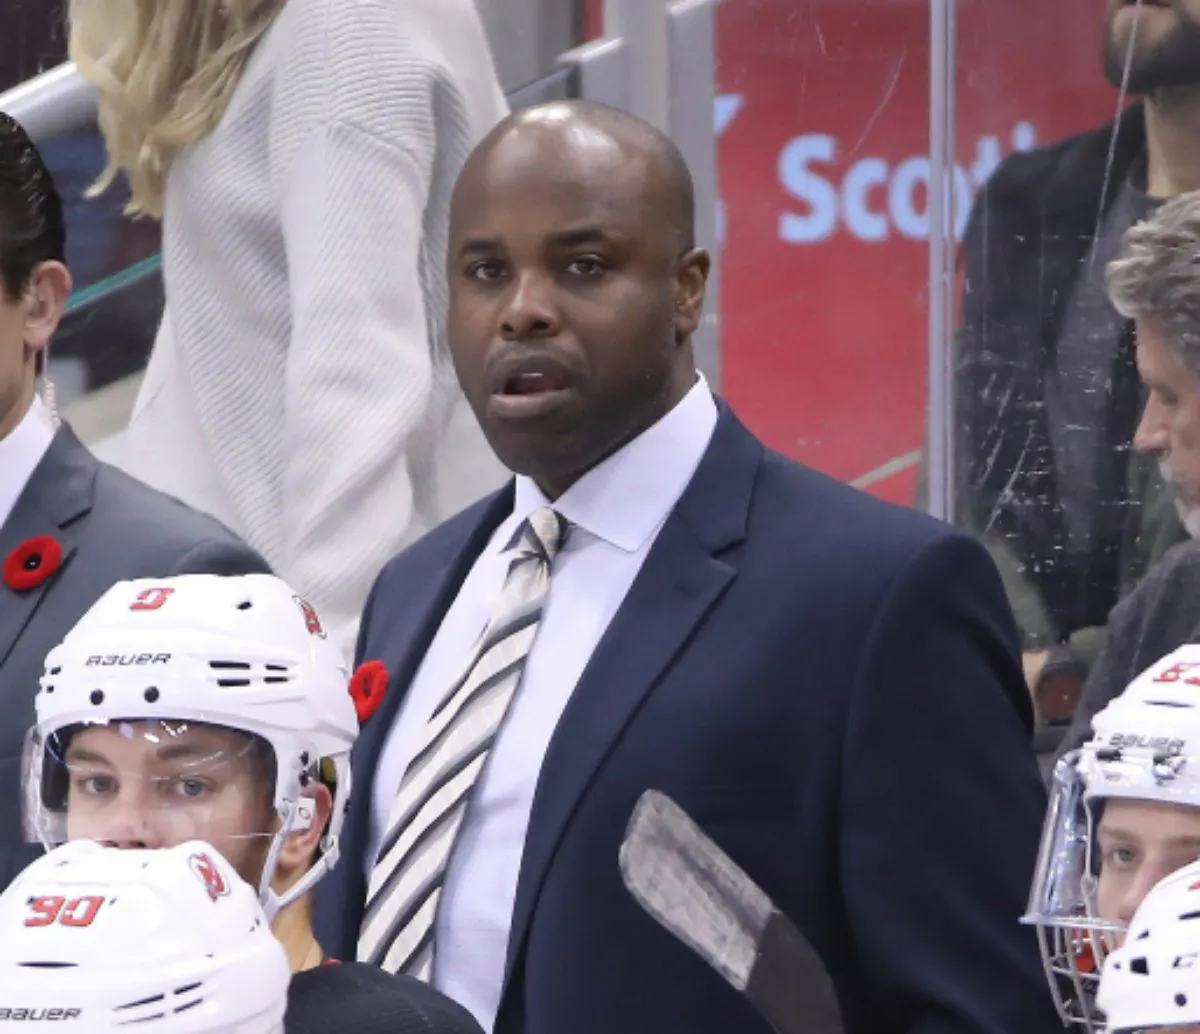 San Jose Sharks to make Mike Grier first black GM in NHL history